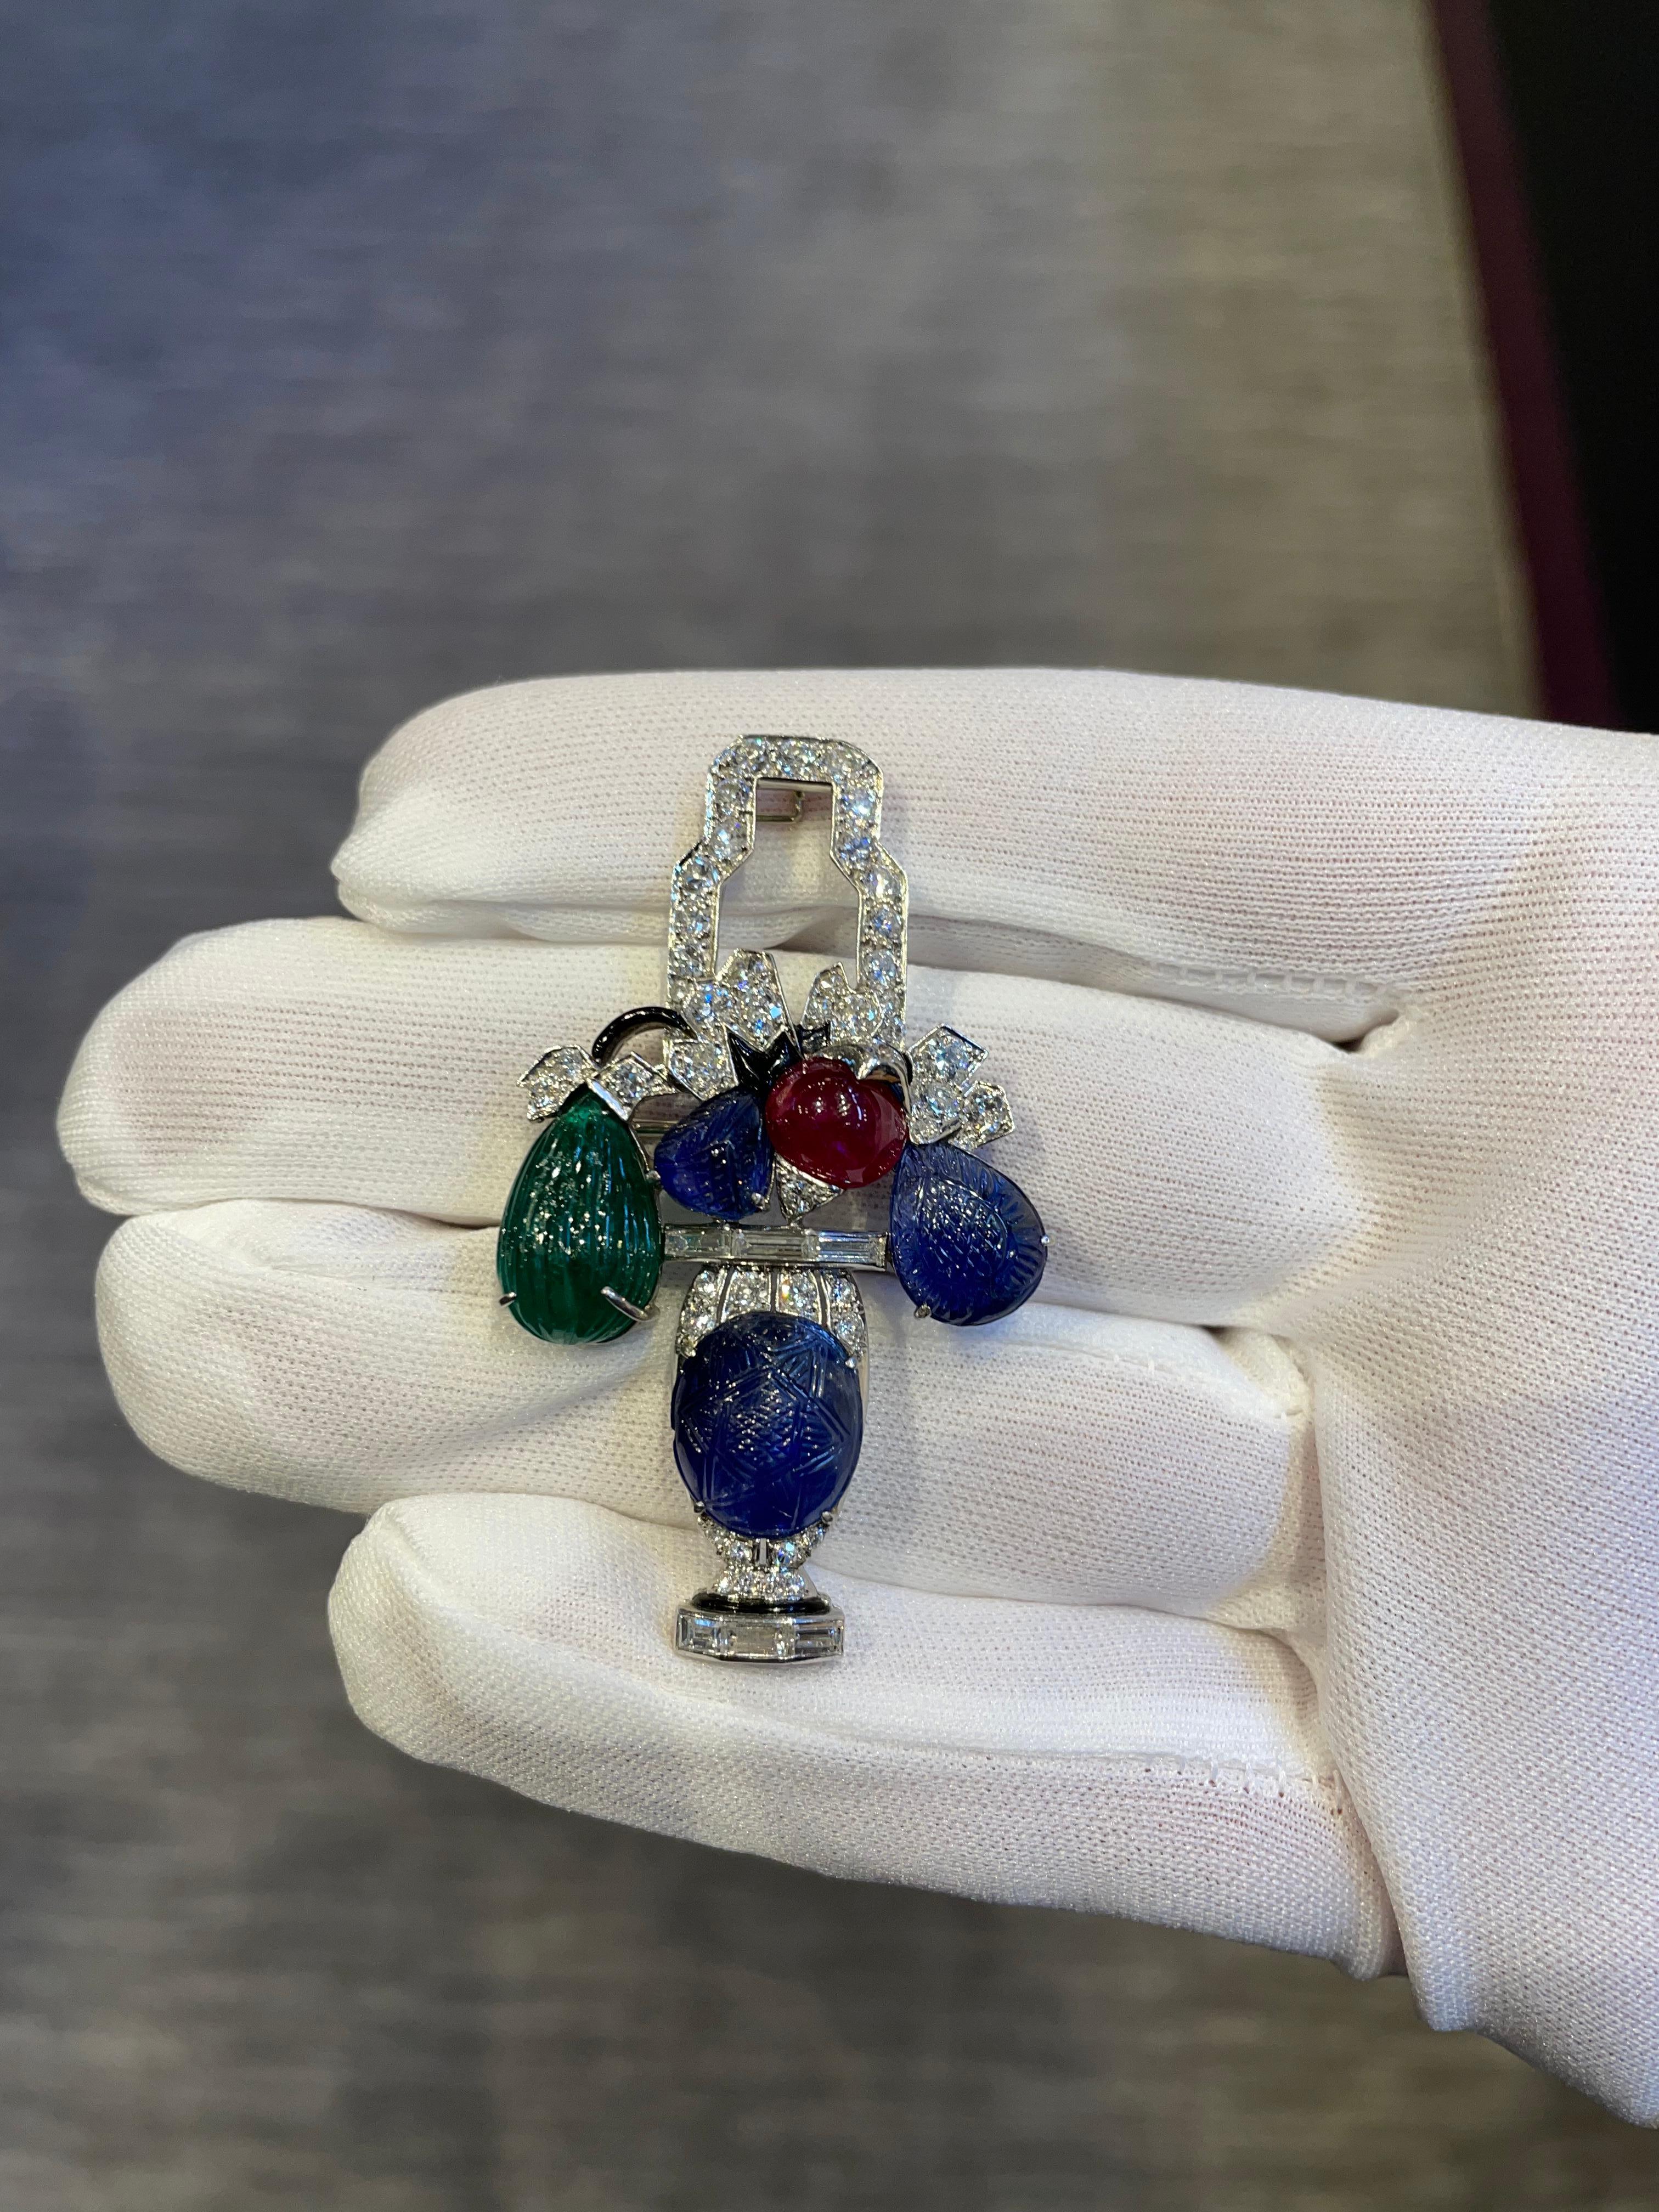 Iconic Mauboussin Art Deco Tutti Frutti Giardinetto Brooch

Set with diamonds, cabochon ruby and carved sapphires and emerald.

Made in France. 1928.

With Certificate of Authenticity issued by Mauboussin
